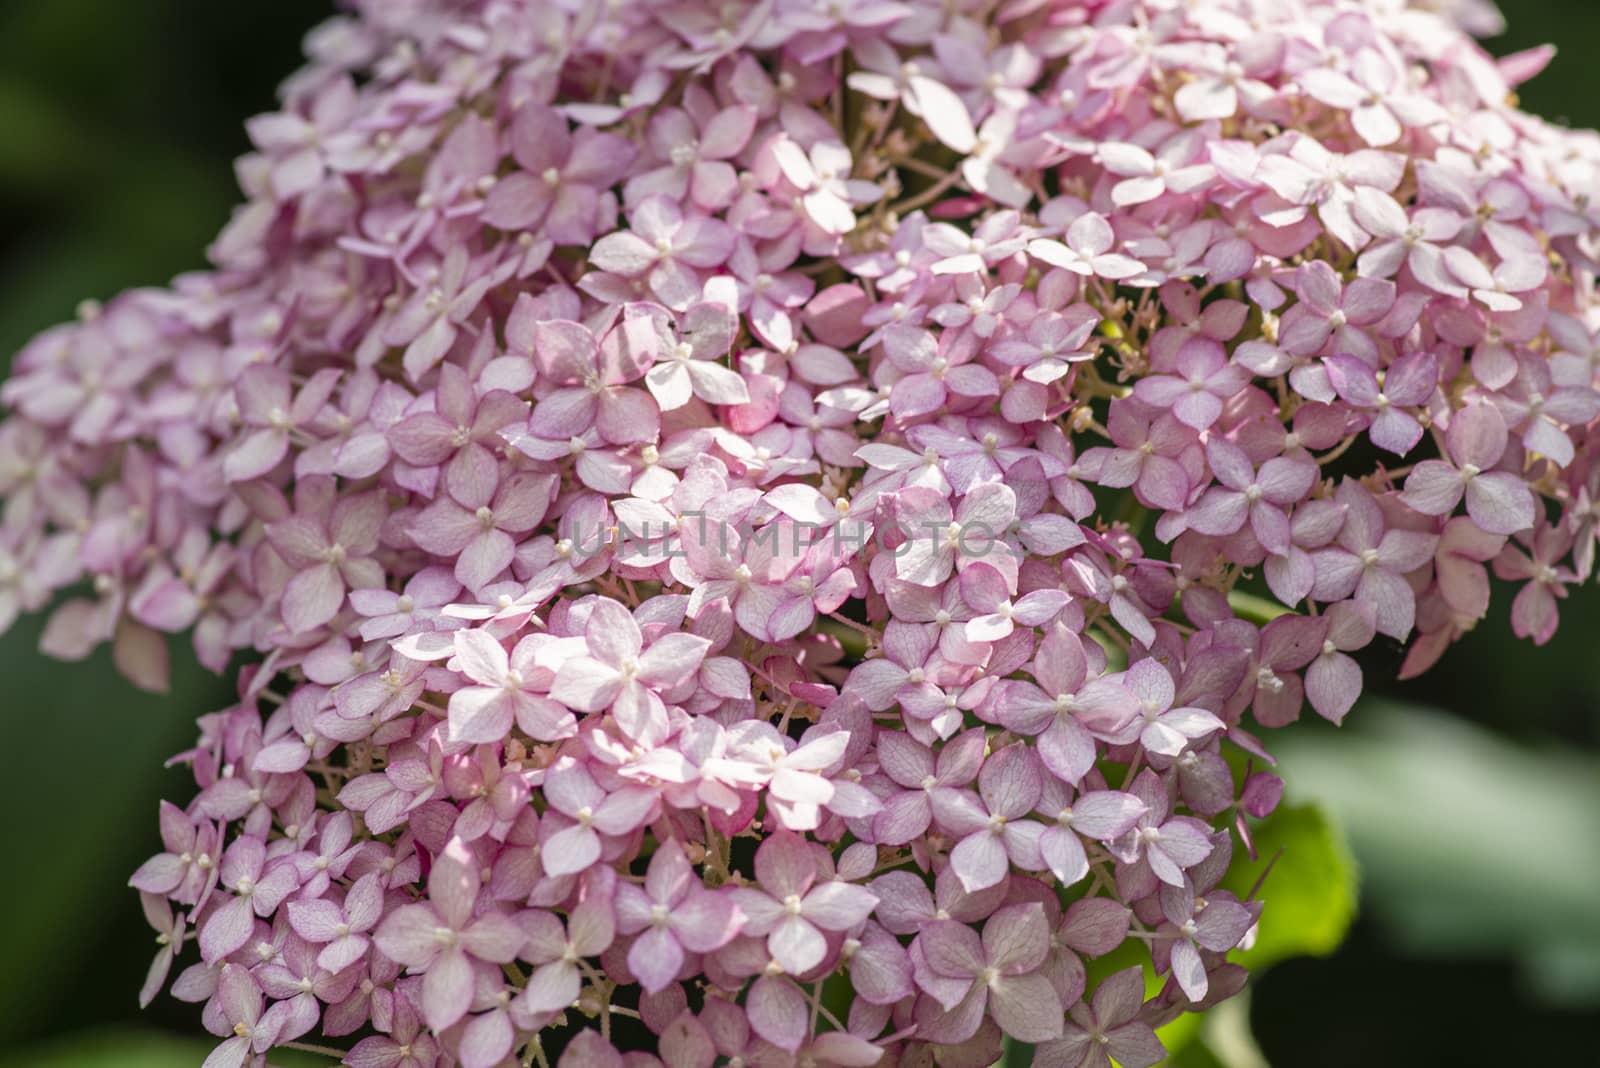 Flowers are blooming in spring and summer .Hydrangea macrophylla blooming in a gardenBeautiful flowers background and pattern. Hydrangea bushes are lilac, violet, pink.Close-up